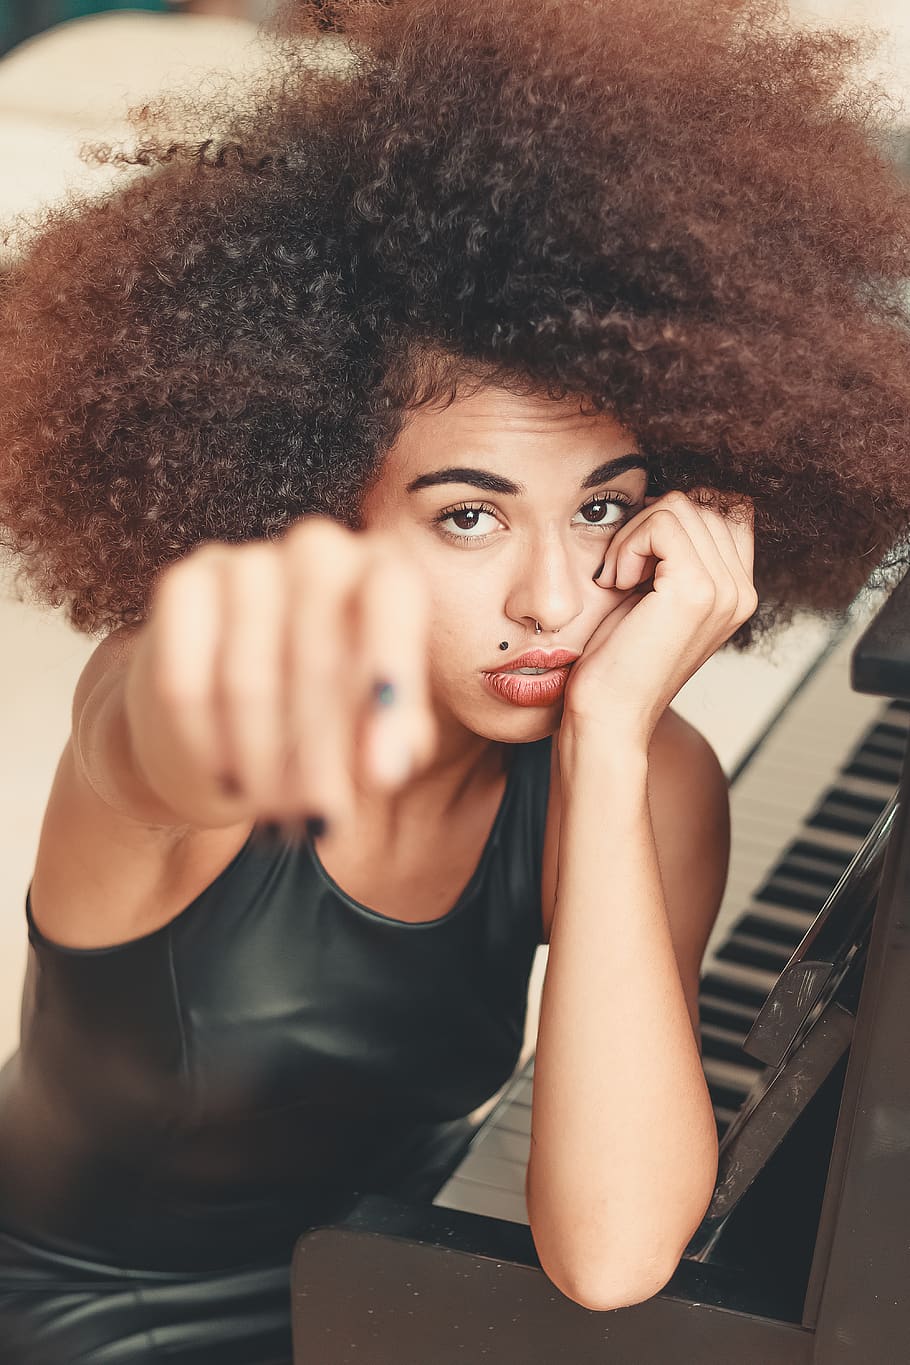 Woman Leaning on Piano While Raising Right Hand Forward, afro